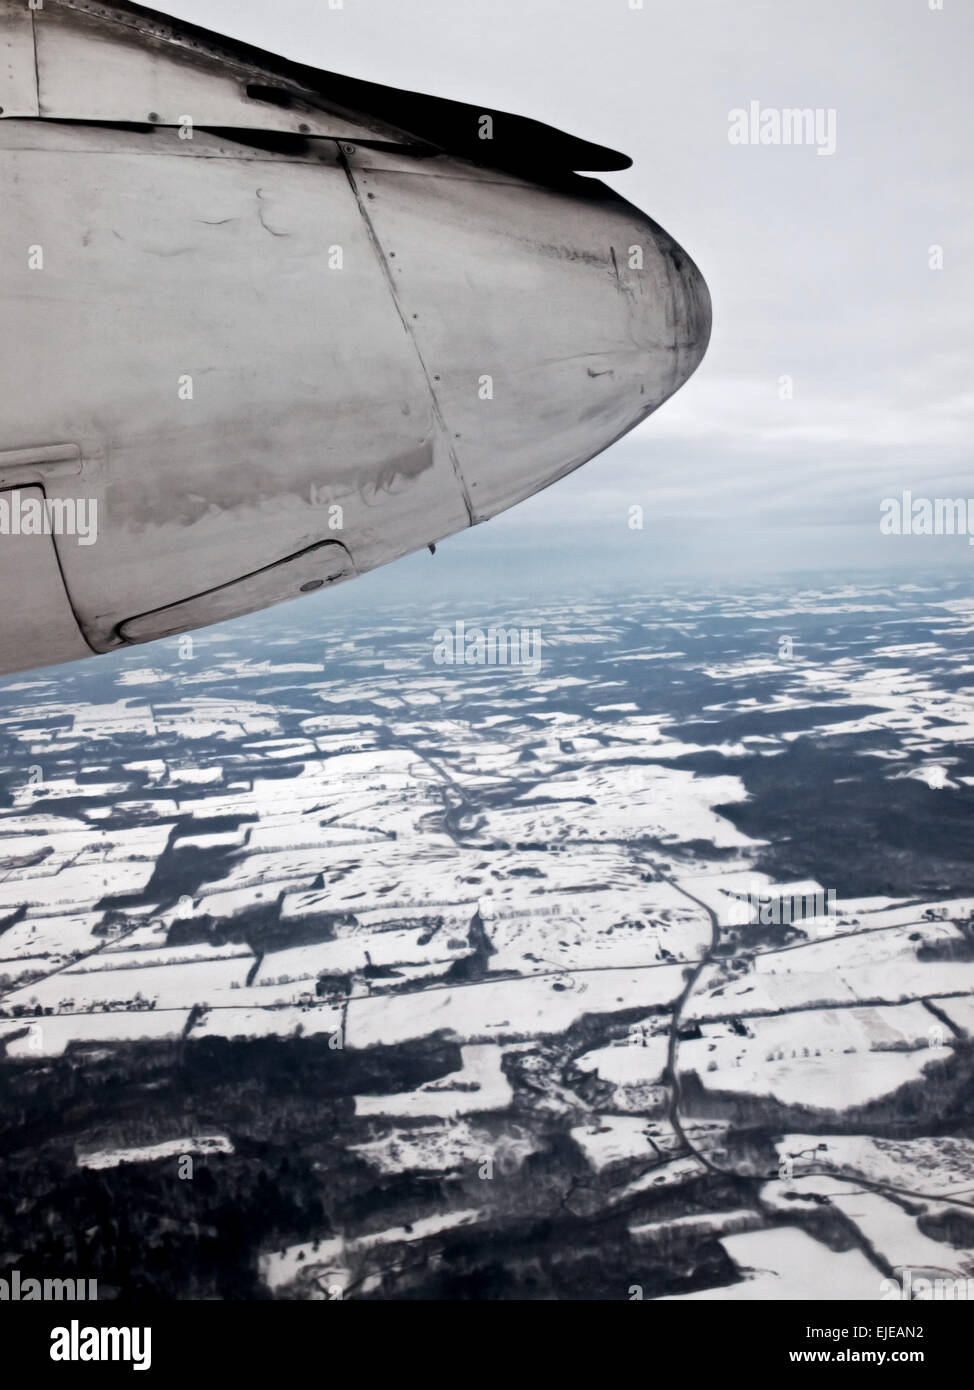 view of the landing gear and wheel well of a Bombardier aircraft over winter landscape Stock Photo